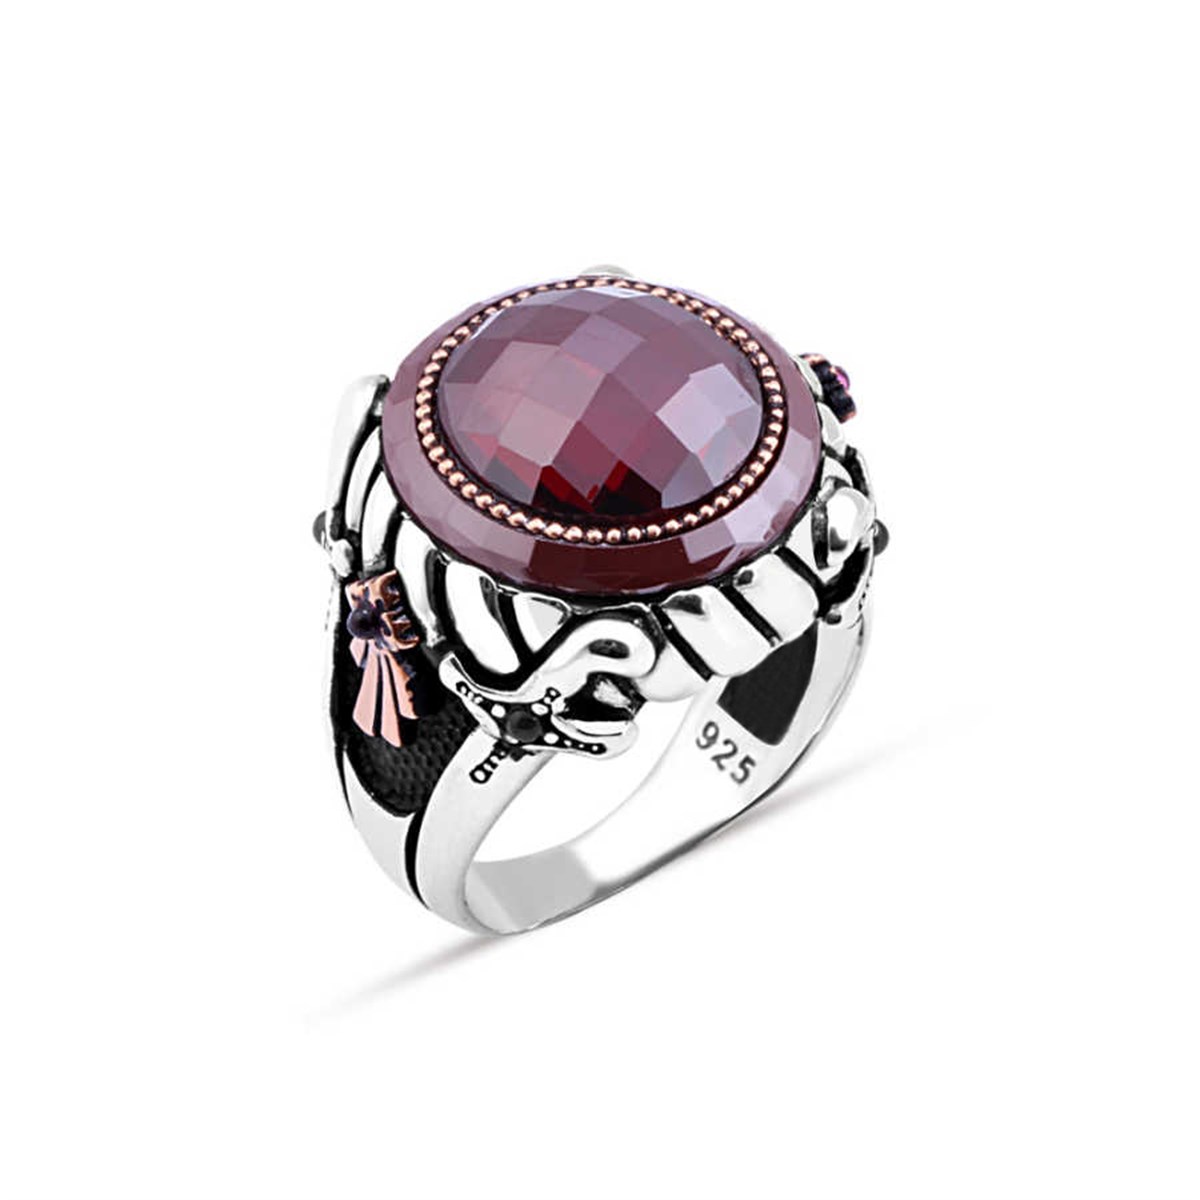 Sterling Silver Men's Ring with Red Zircon Stone and Circle Stone in the Middle